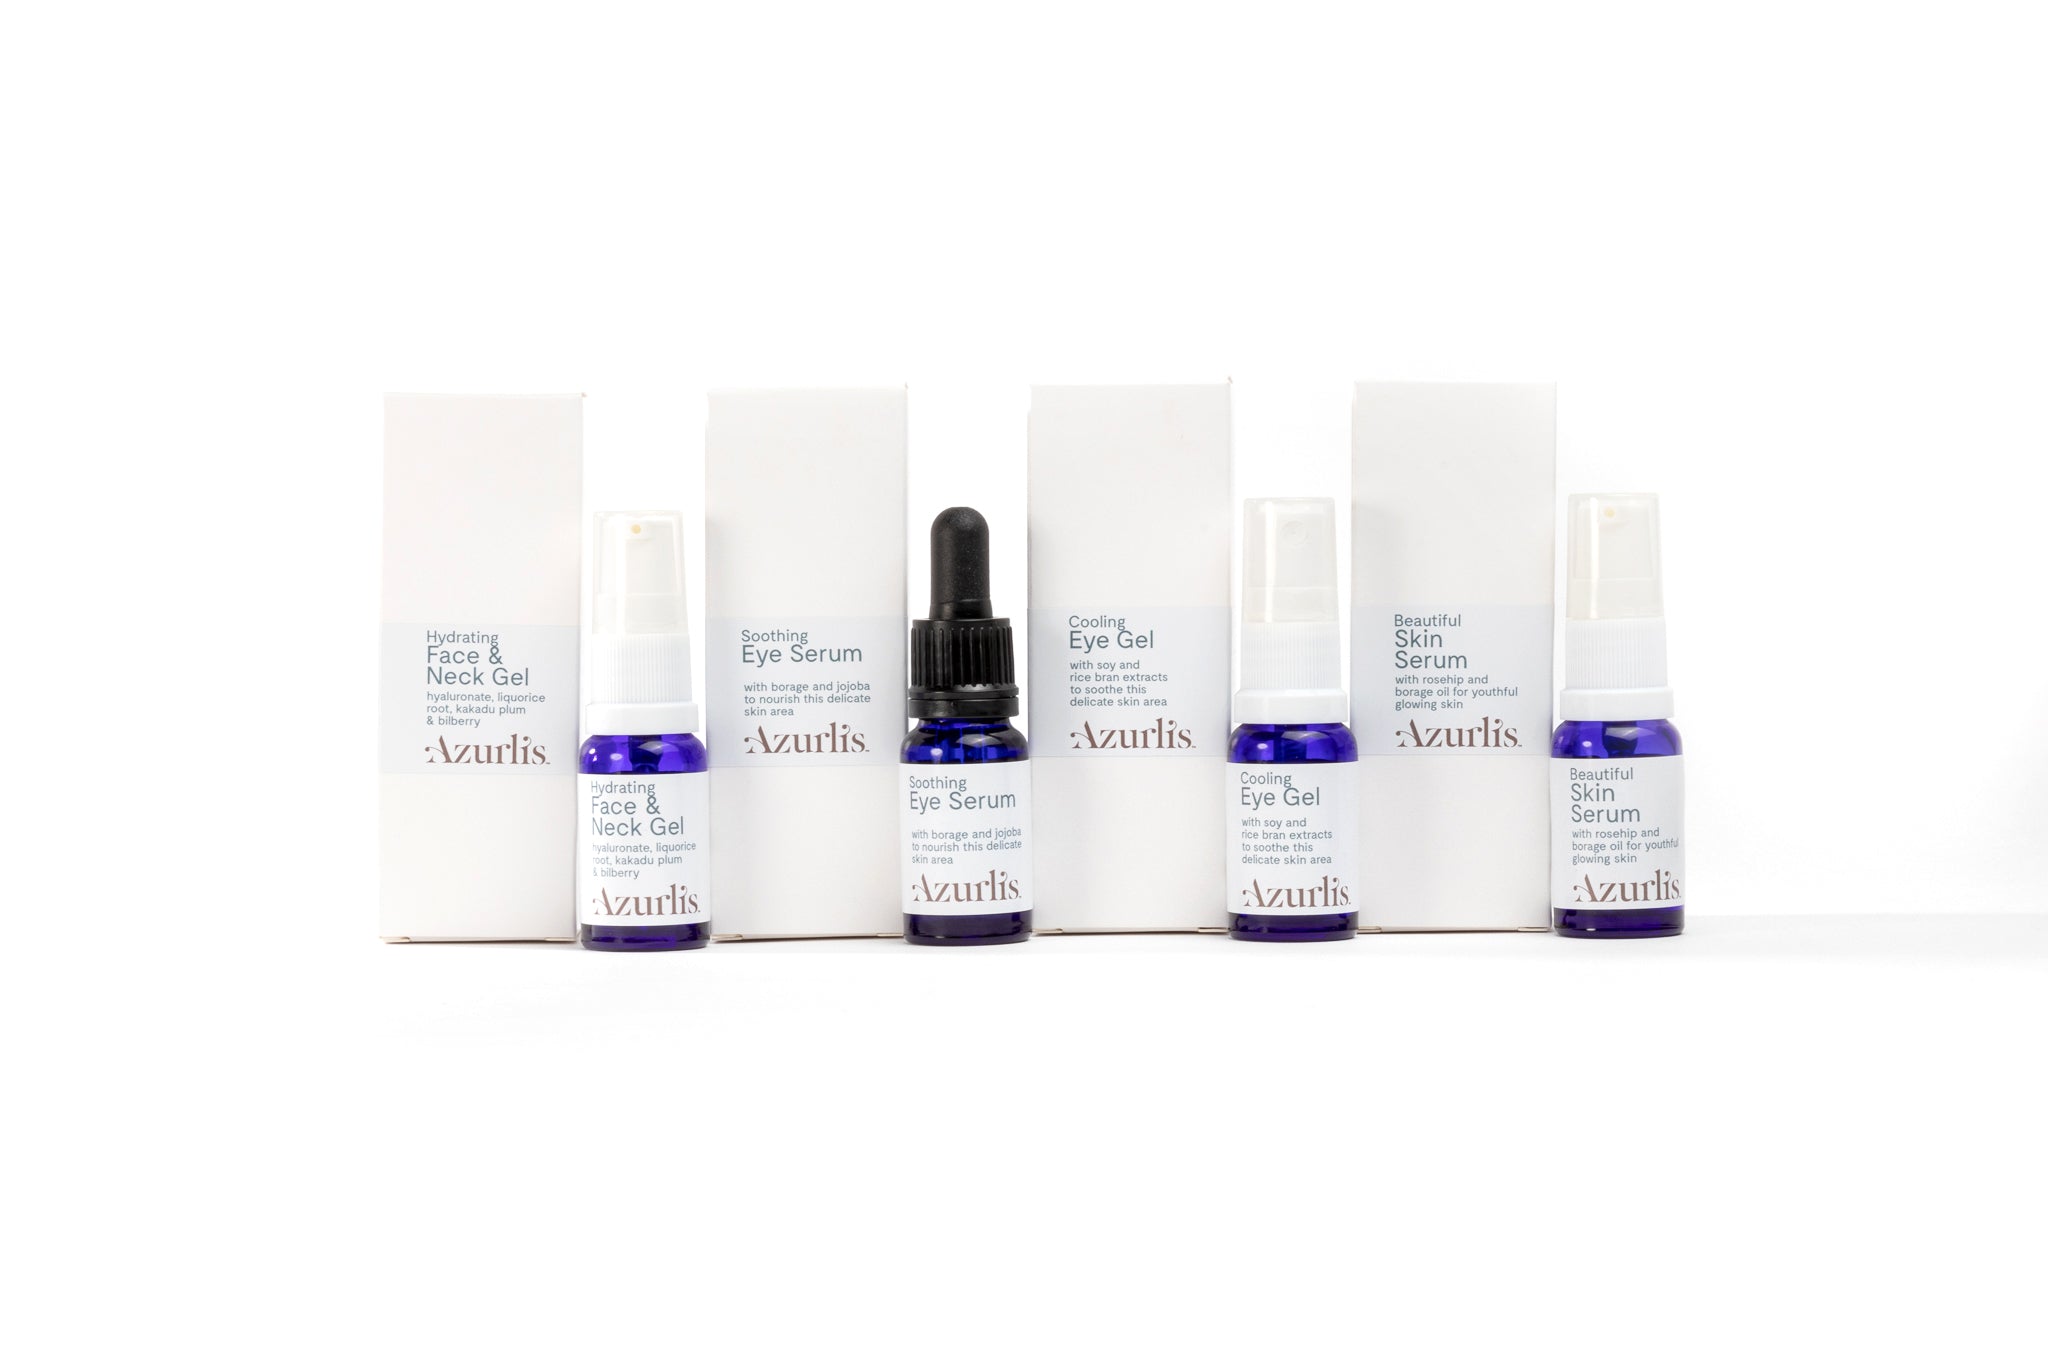 Azurlis™ TLC Skin Serum 10ml Mini was created for acne prone skin. This serum helps to regulate sebaceous gland activity and to control bacterial flora. This is highly recommended for teenage skins in combination with the Tender Loving Care Moisturising For Teens and the Tender Loving Care Cleanser For Teens.